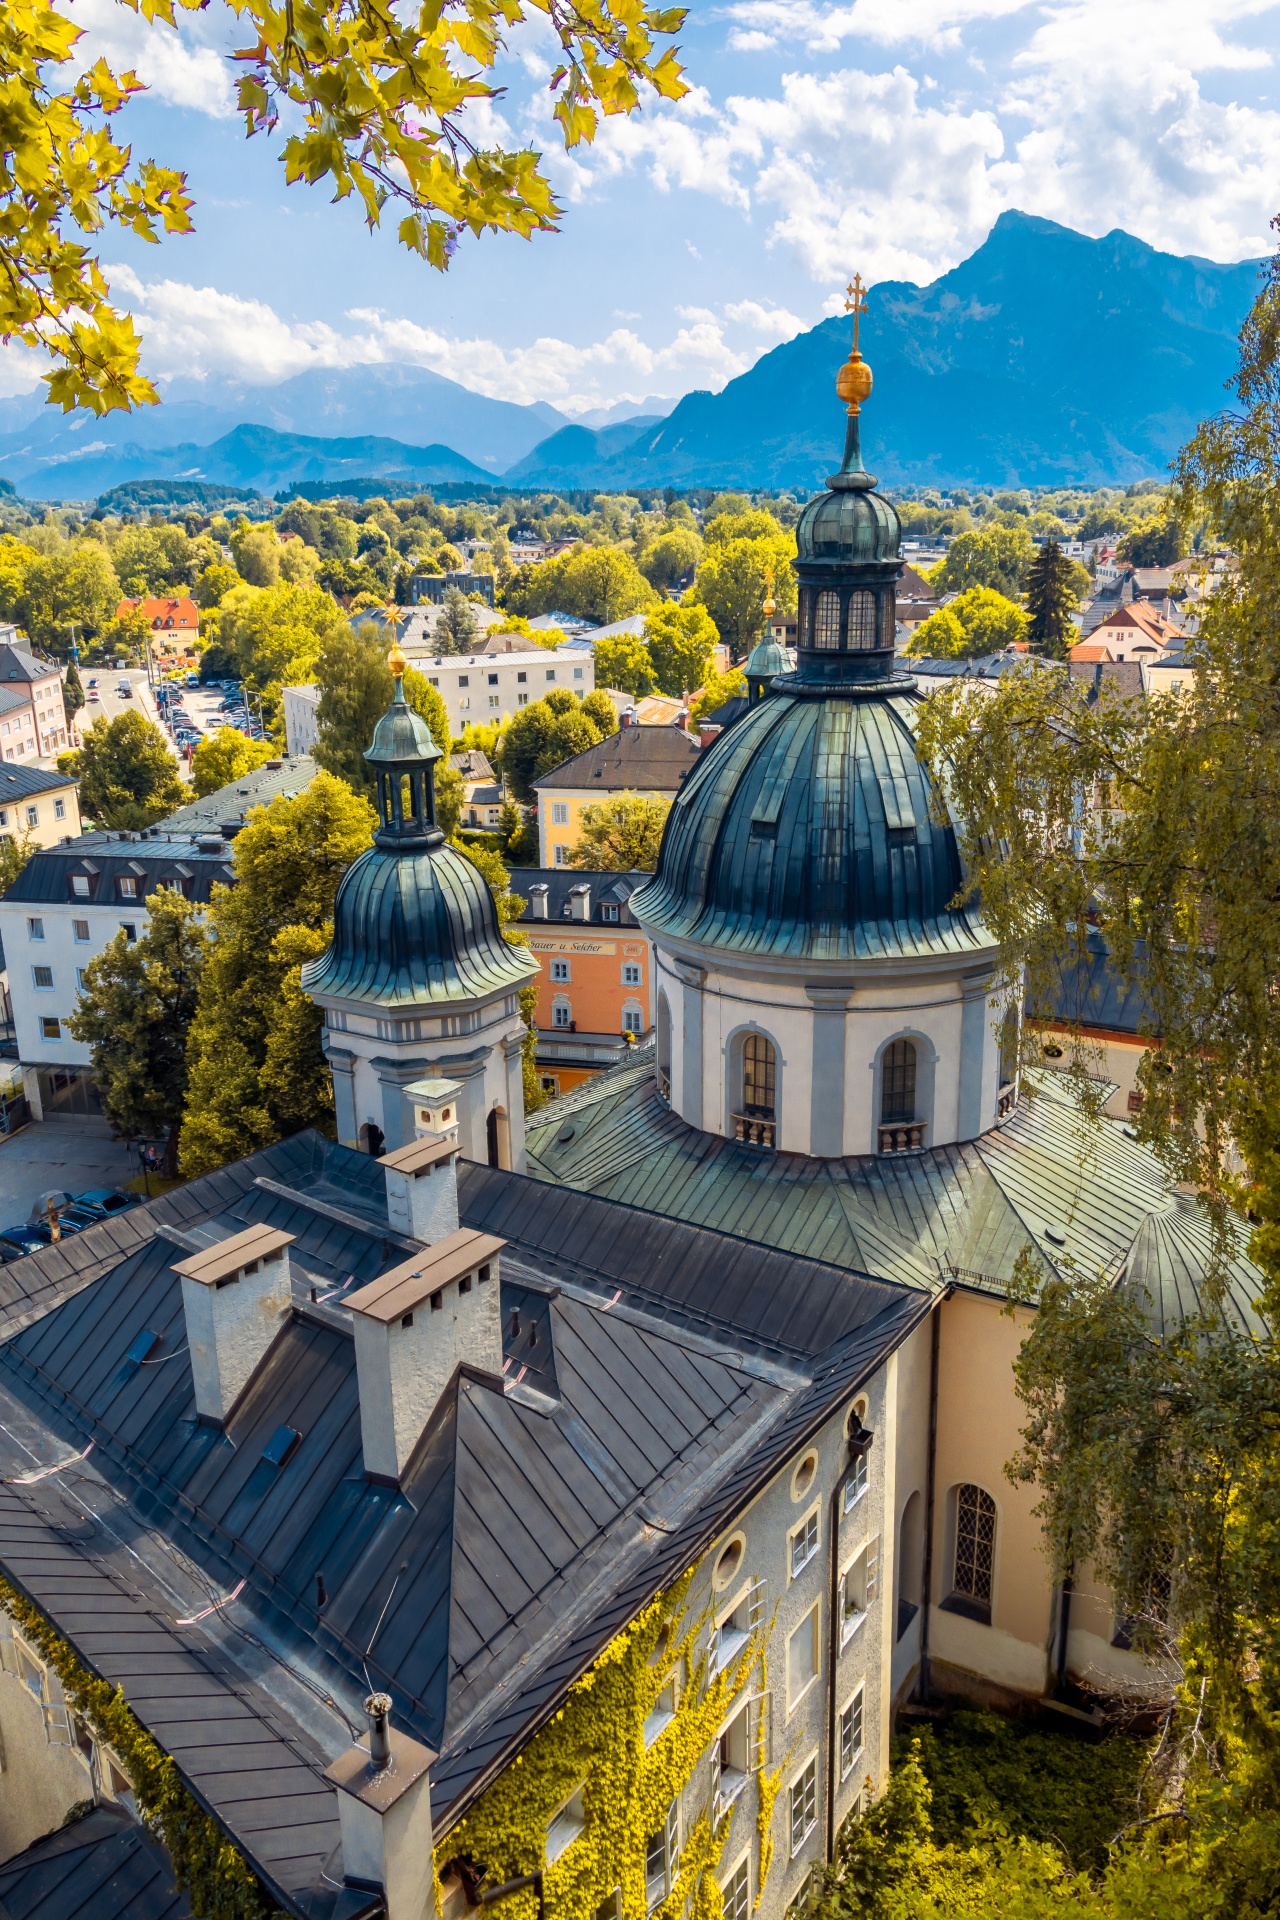 Saint Erhard church and other buildings from above in Salzburg, Austria